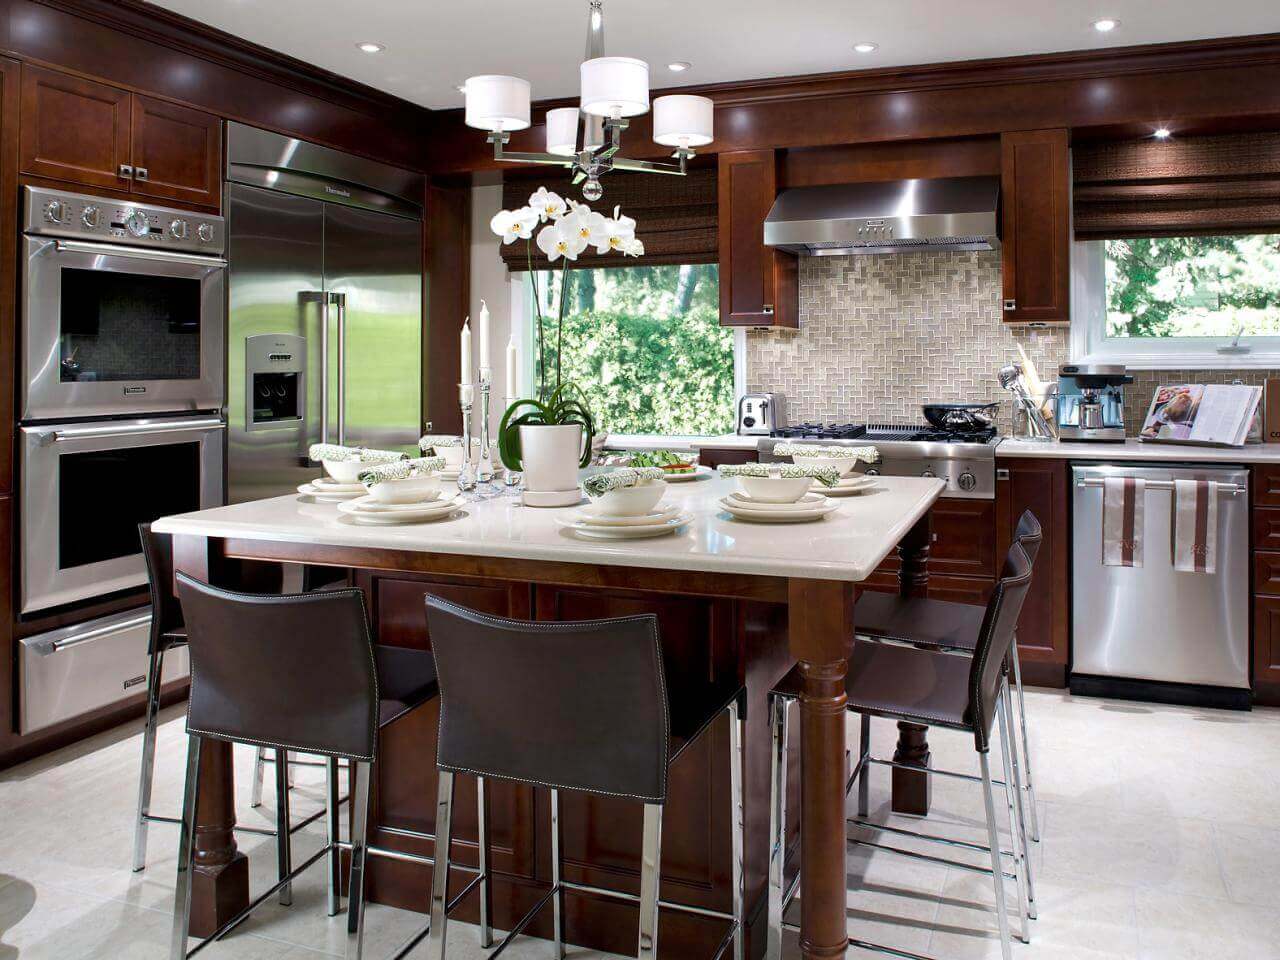 How To Design A Kitchen Island With Seating: 6 Experts Advise